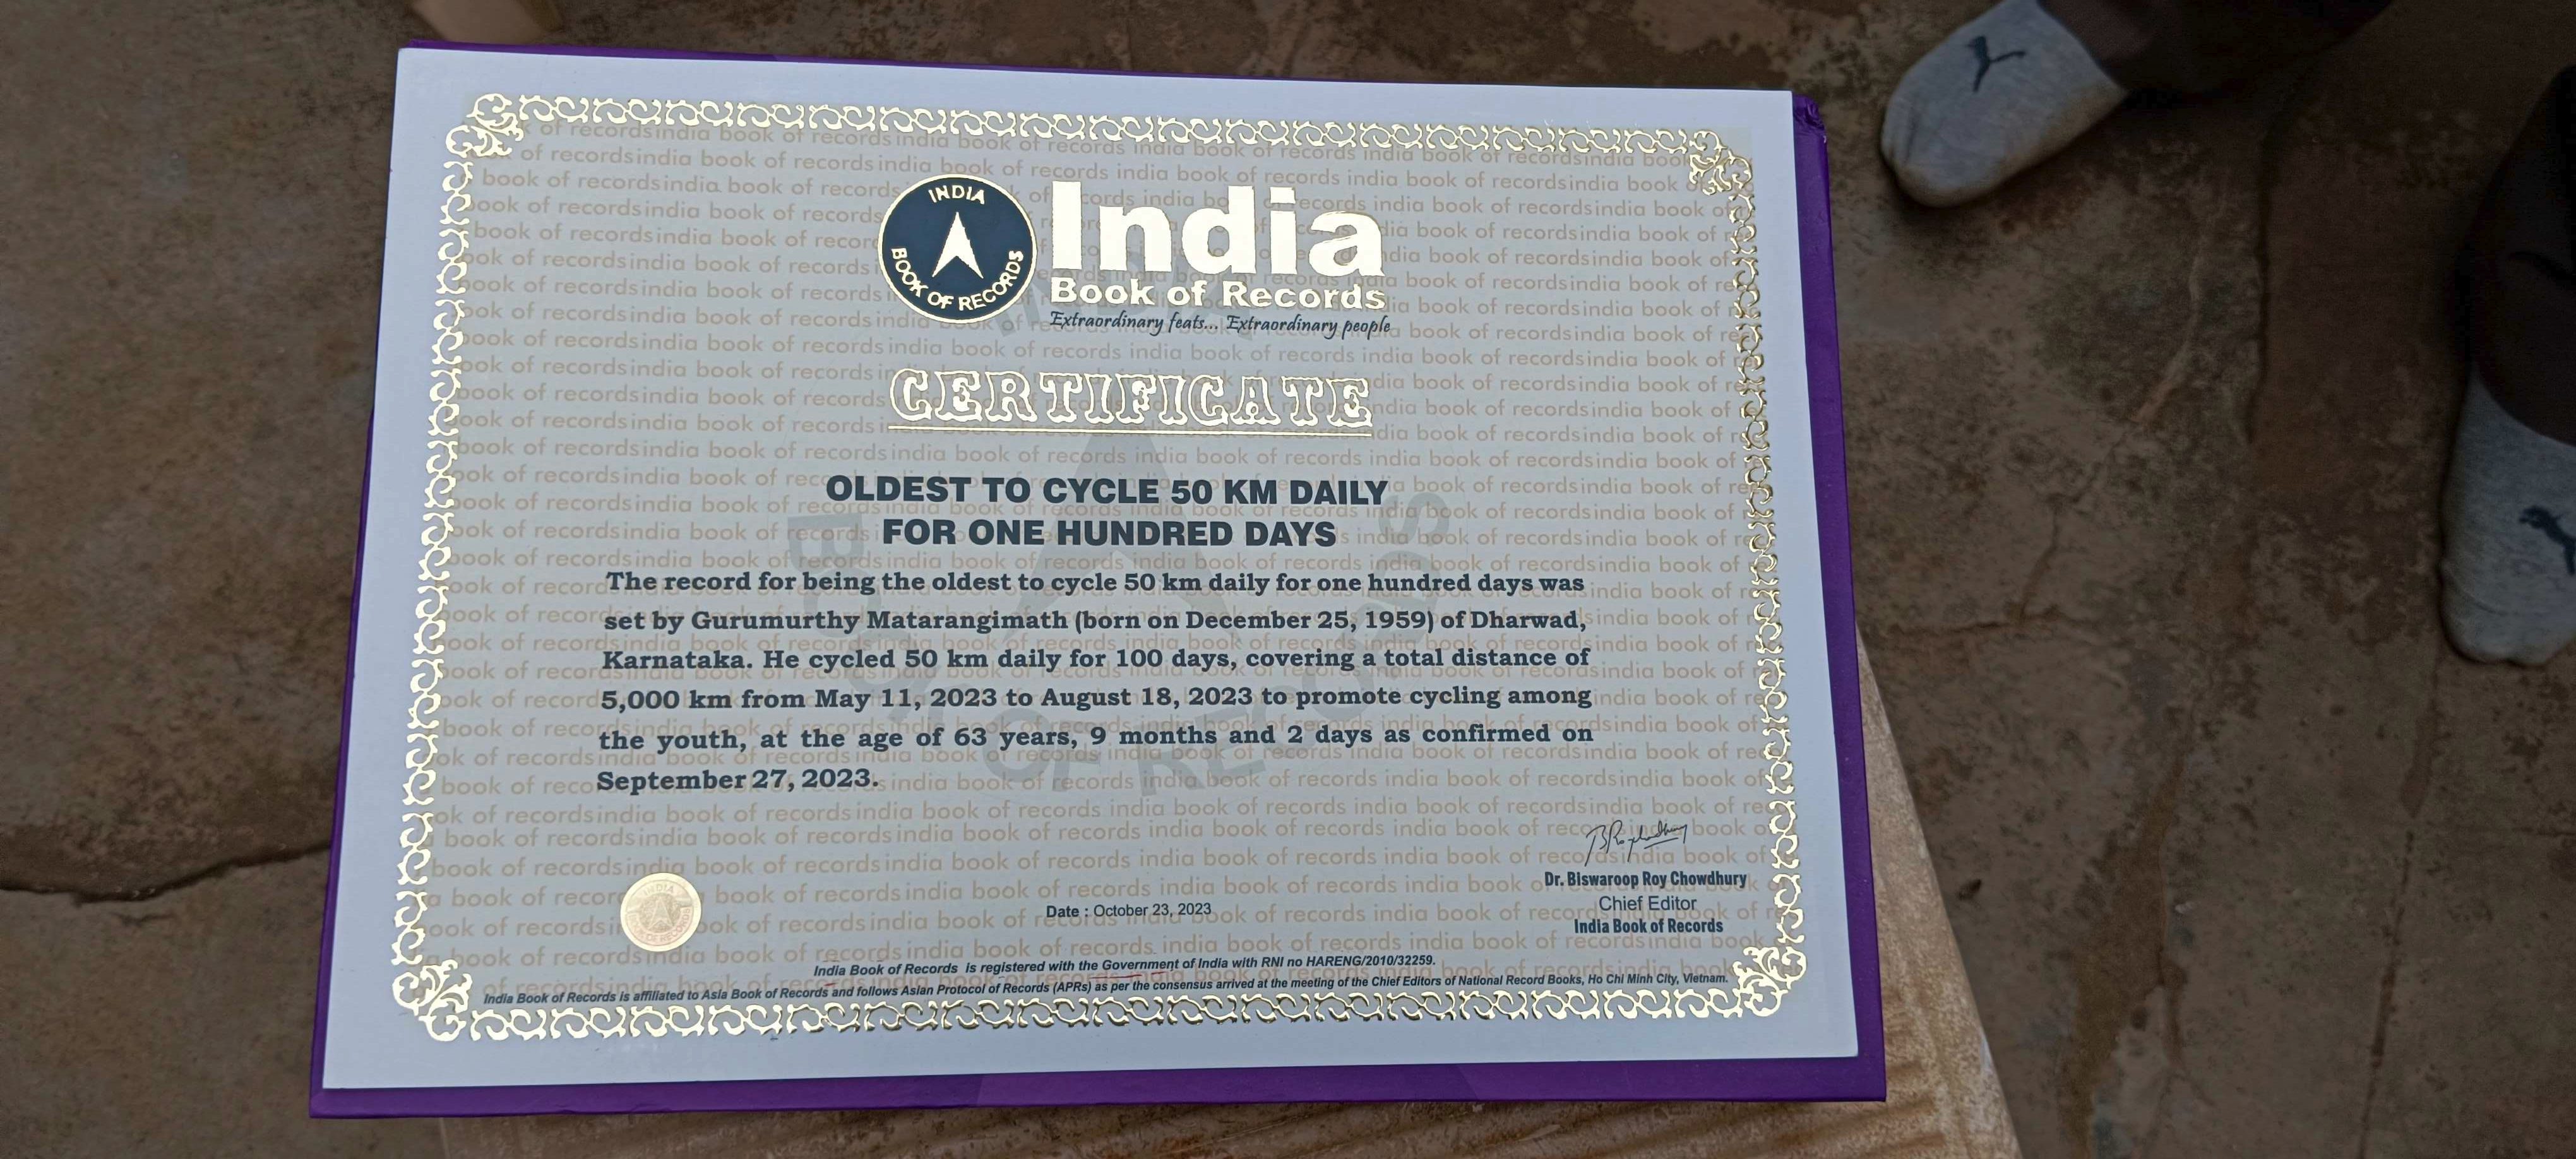 India Book of Record in Cycling